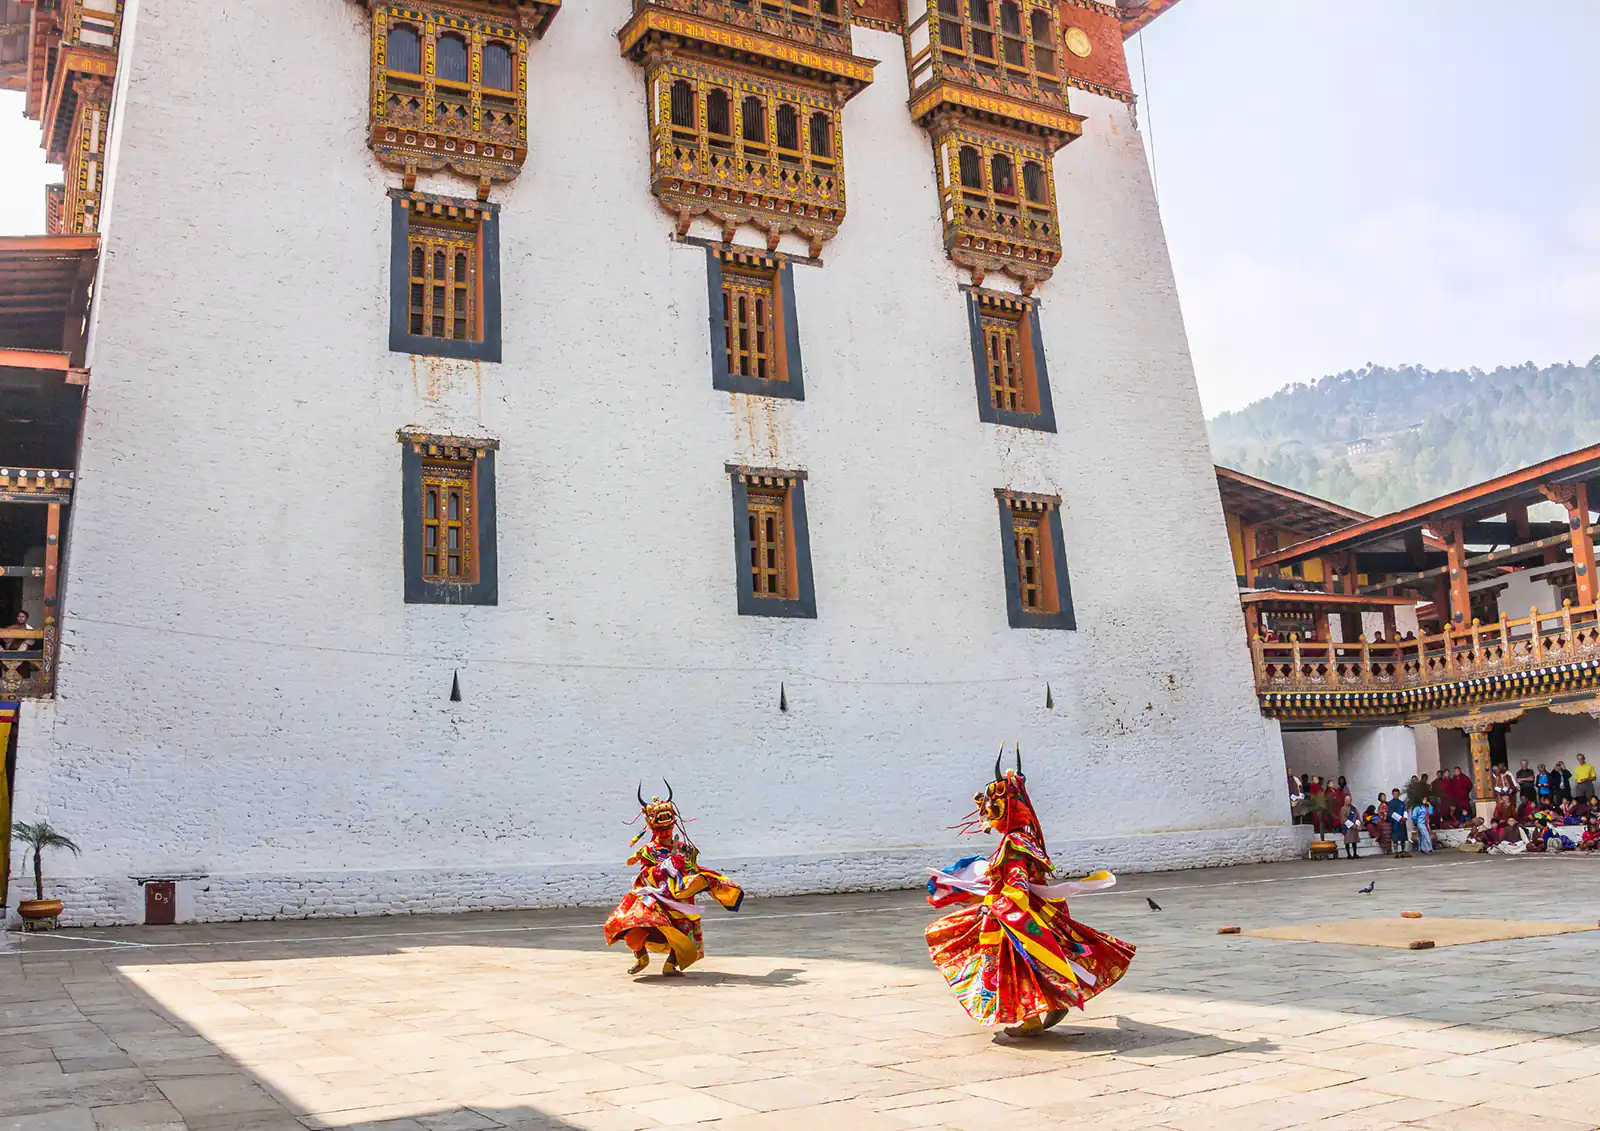 Two masked dancers perform at Bhutan's annual drunken festival, held in the Punakha dzong every March.